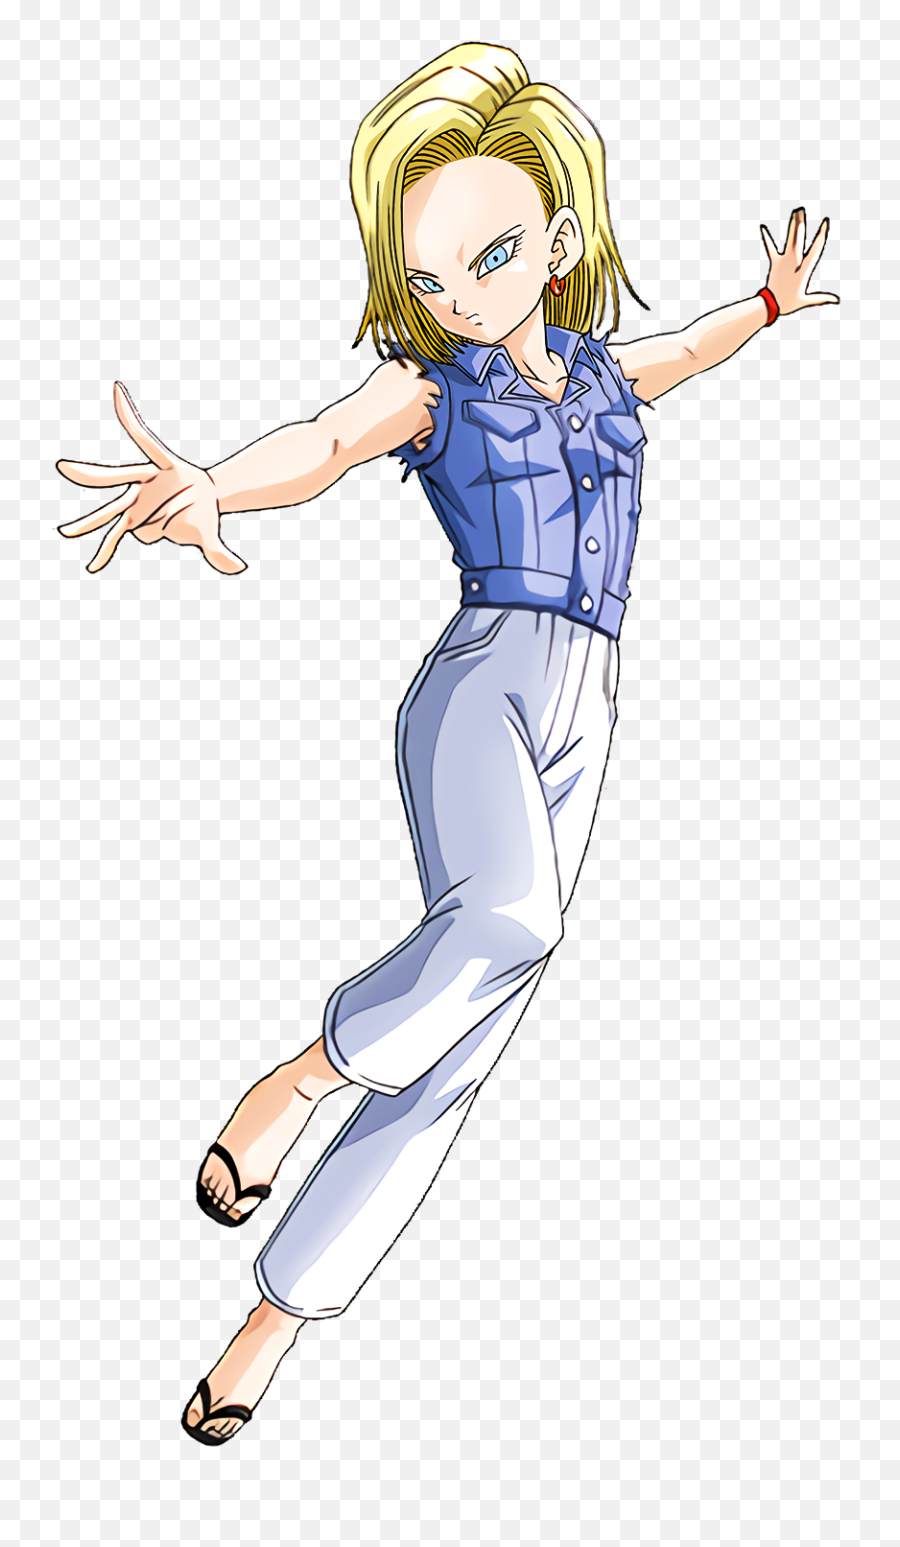 Fighting Power Not Waning Down Android - Inexhaustible Fighting Power Android 18 Emoji,Android 18 Png